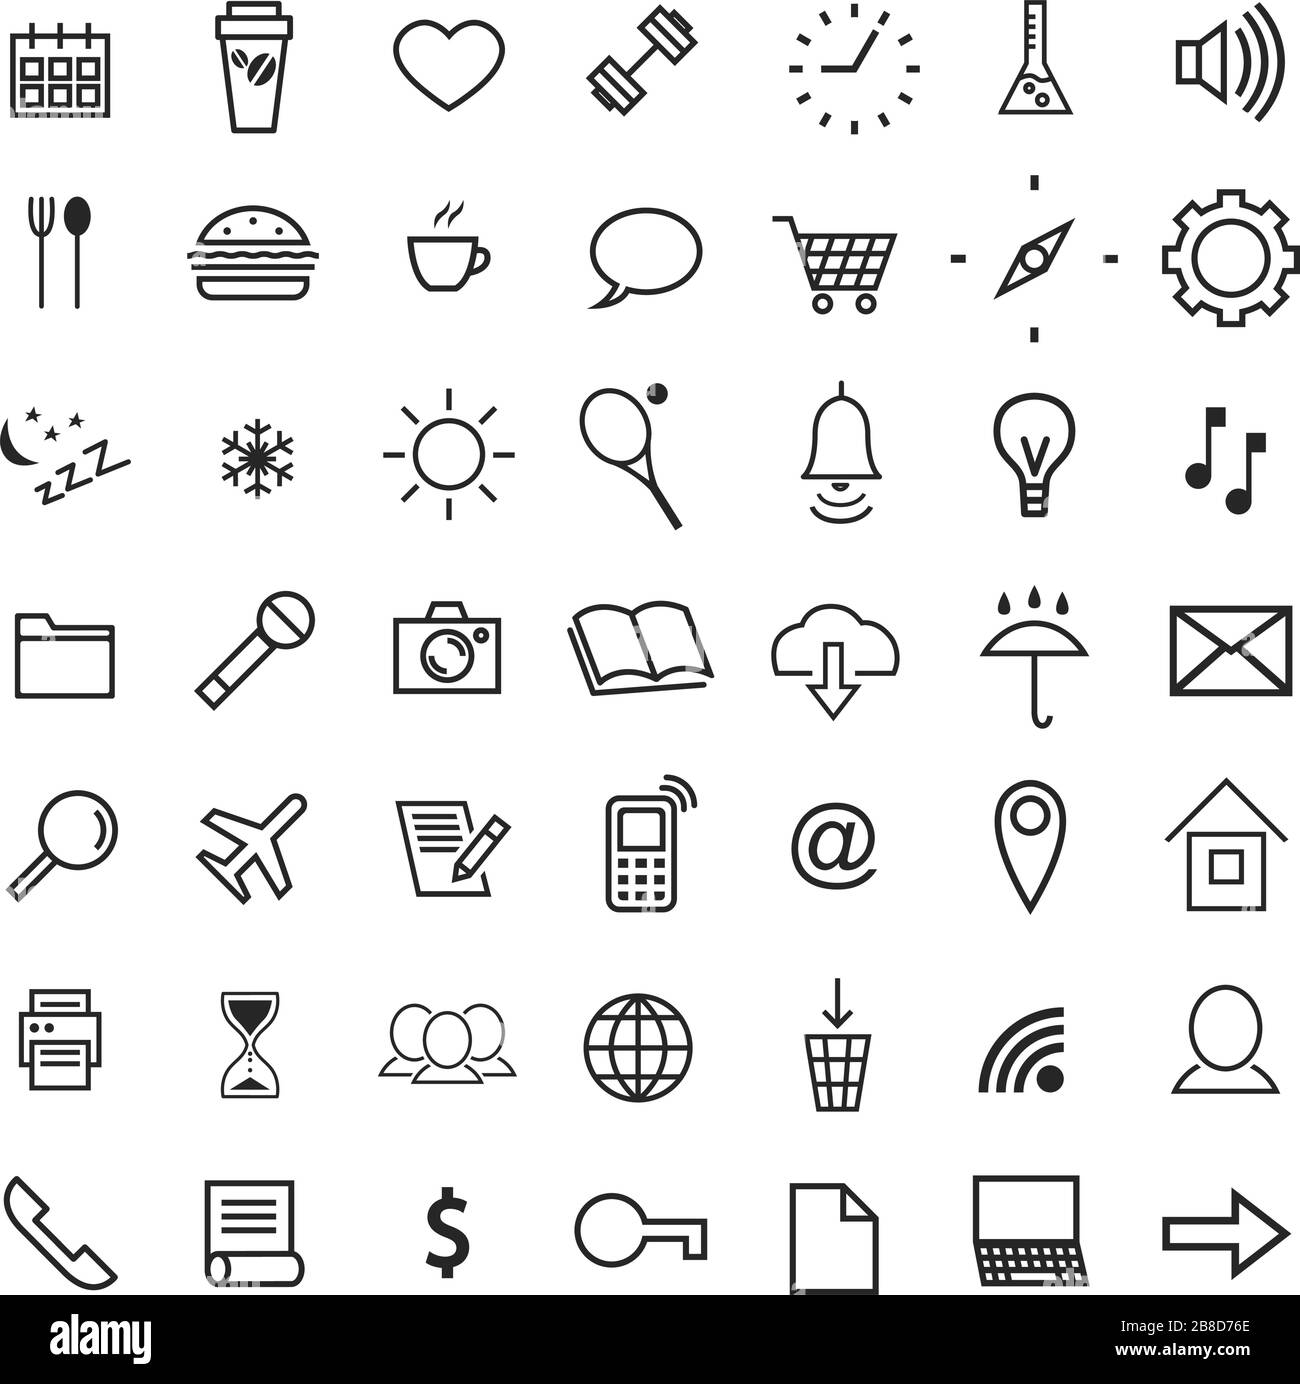 Set of icons on the theme of lifestyle. Leisure, sports, food and ...